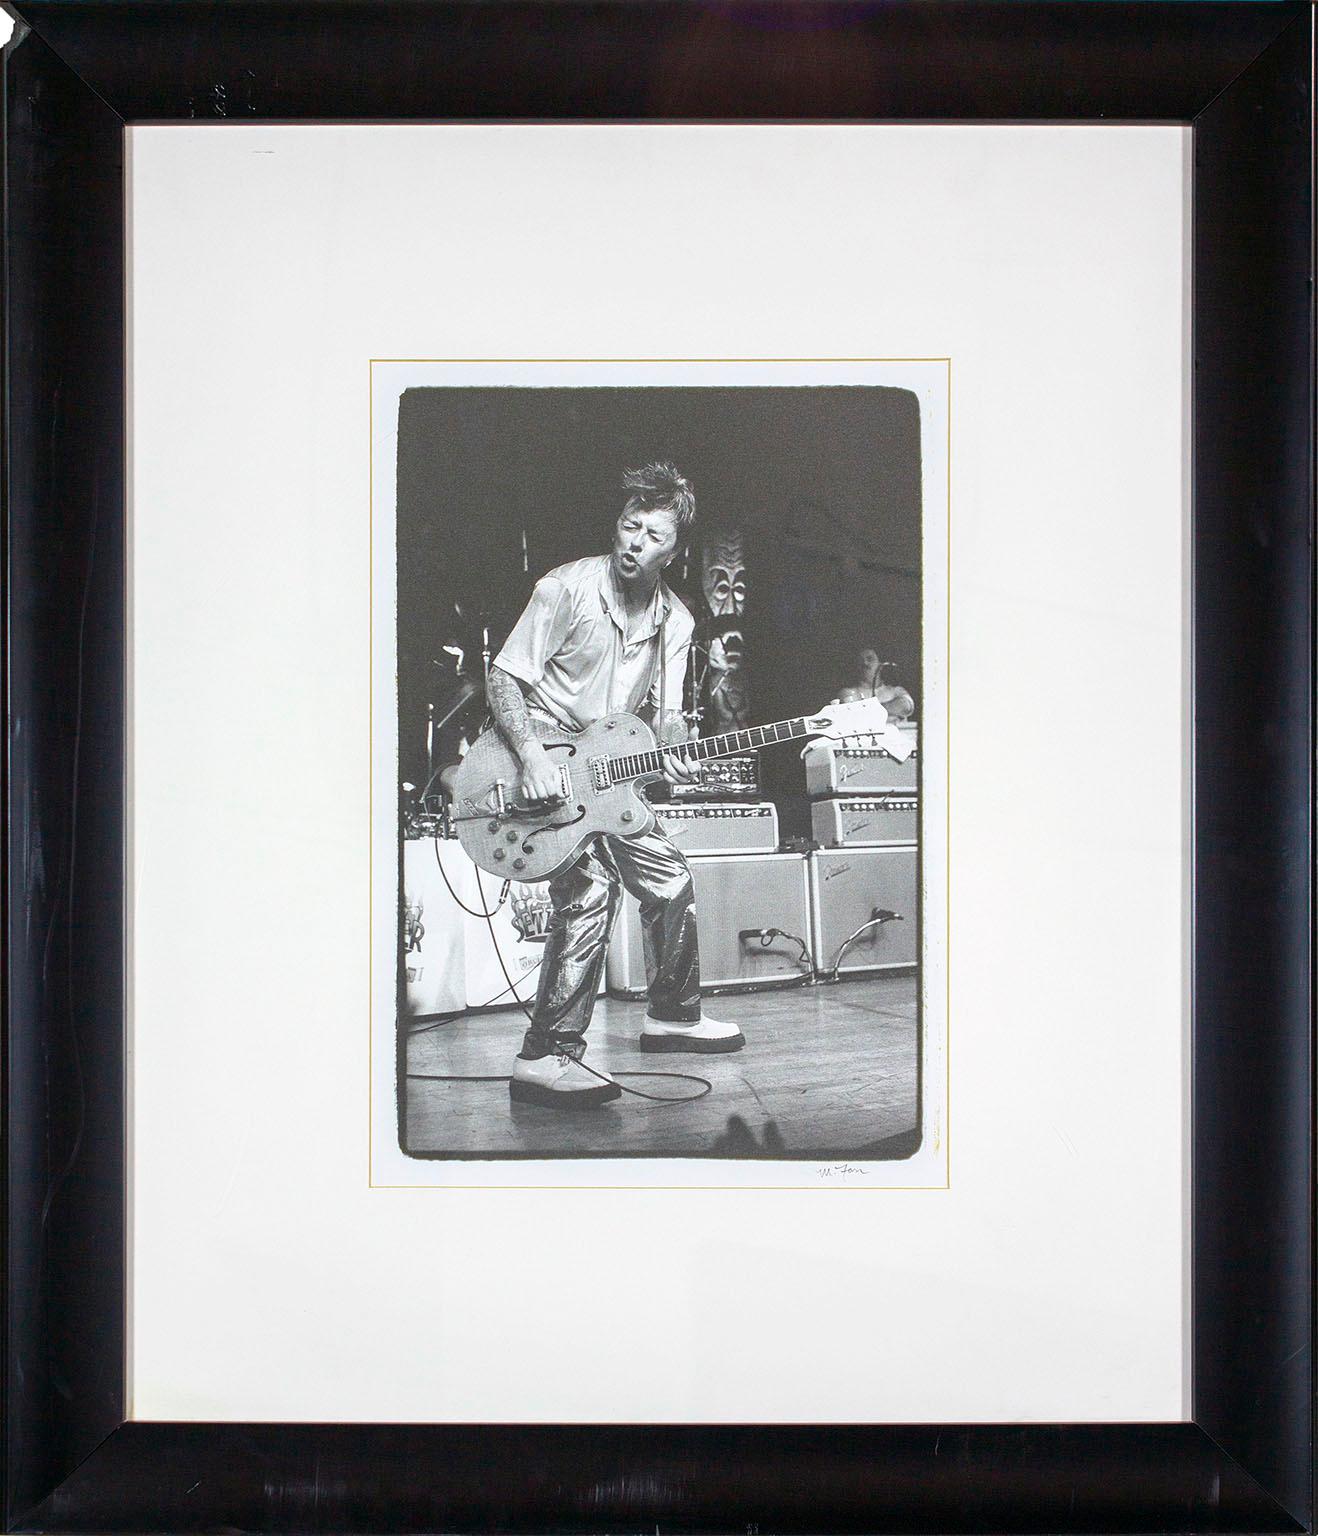 Michael Farr Black and White Photograph - "Brian Setzer 'Stray Cats'" photo from original Hard Rock Hotel and Casino